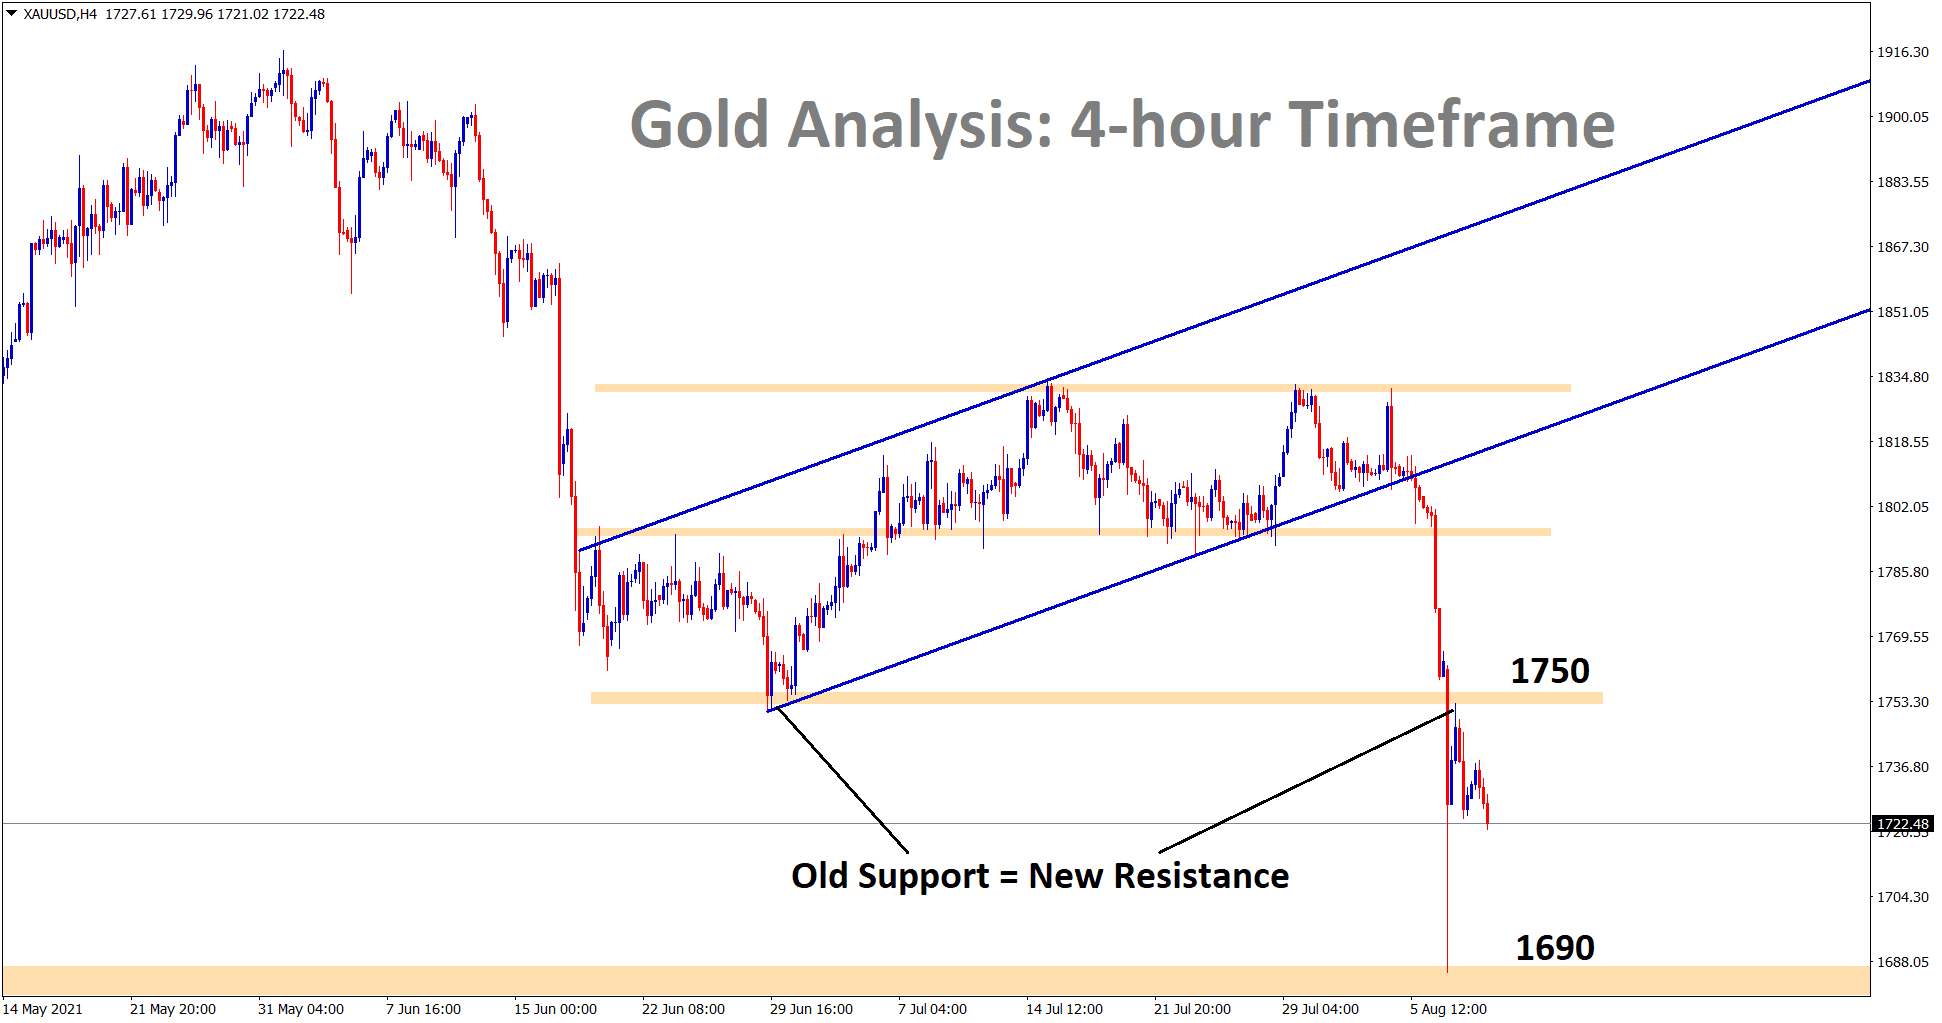 Gold price exactly retested the previous support 1750 and reversed. this shows that Old support now becomes a new resistance